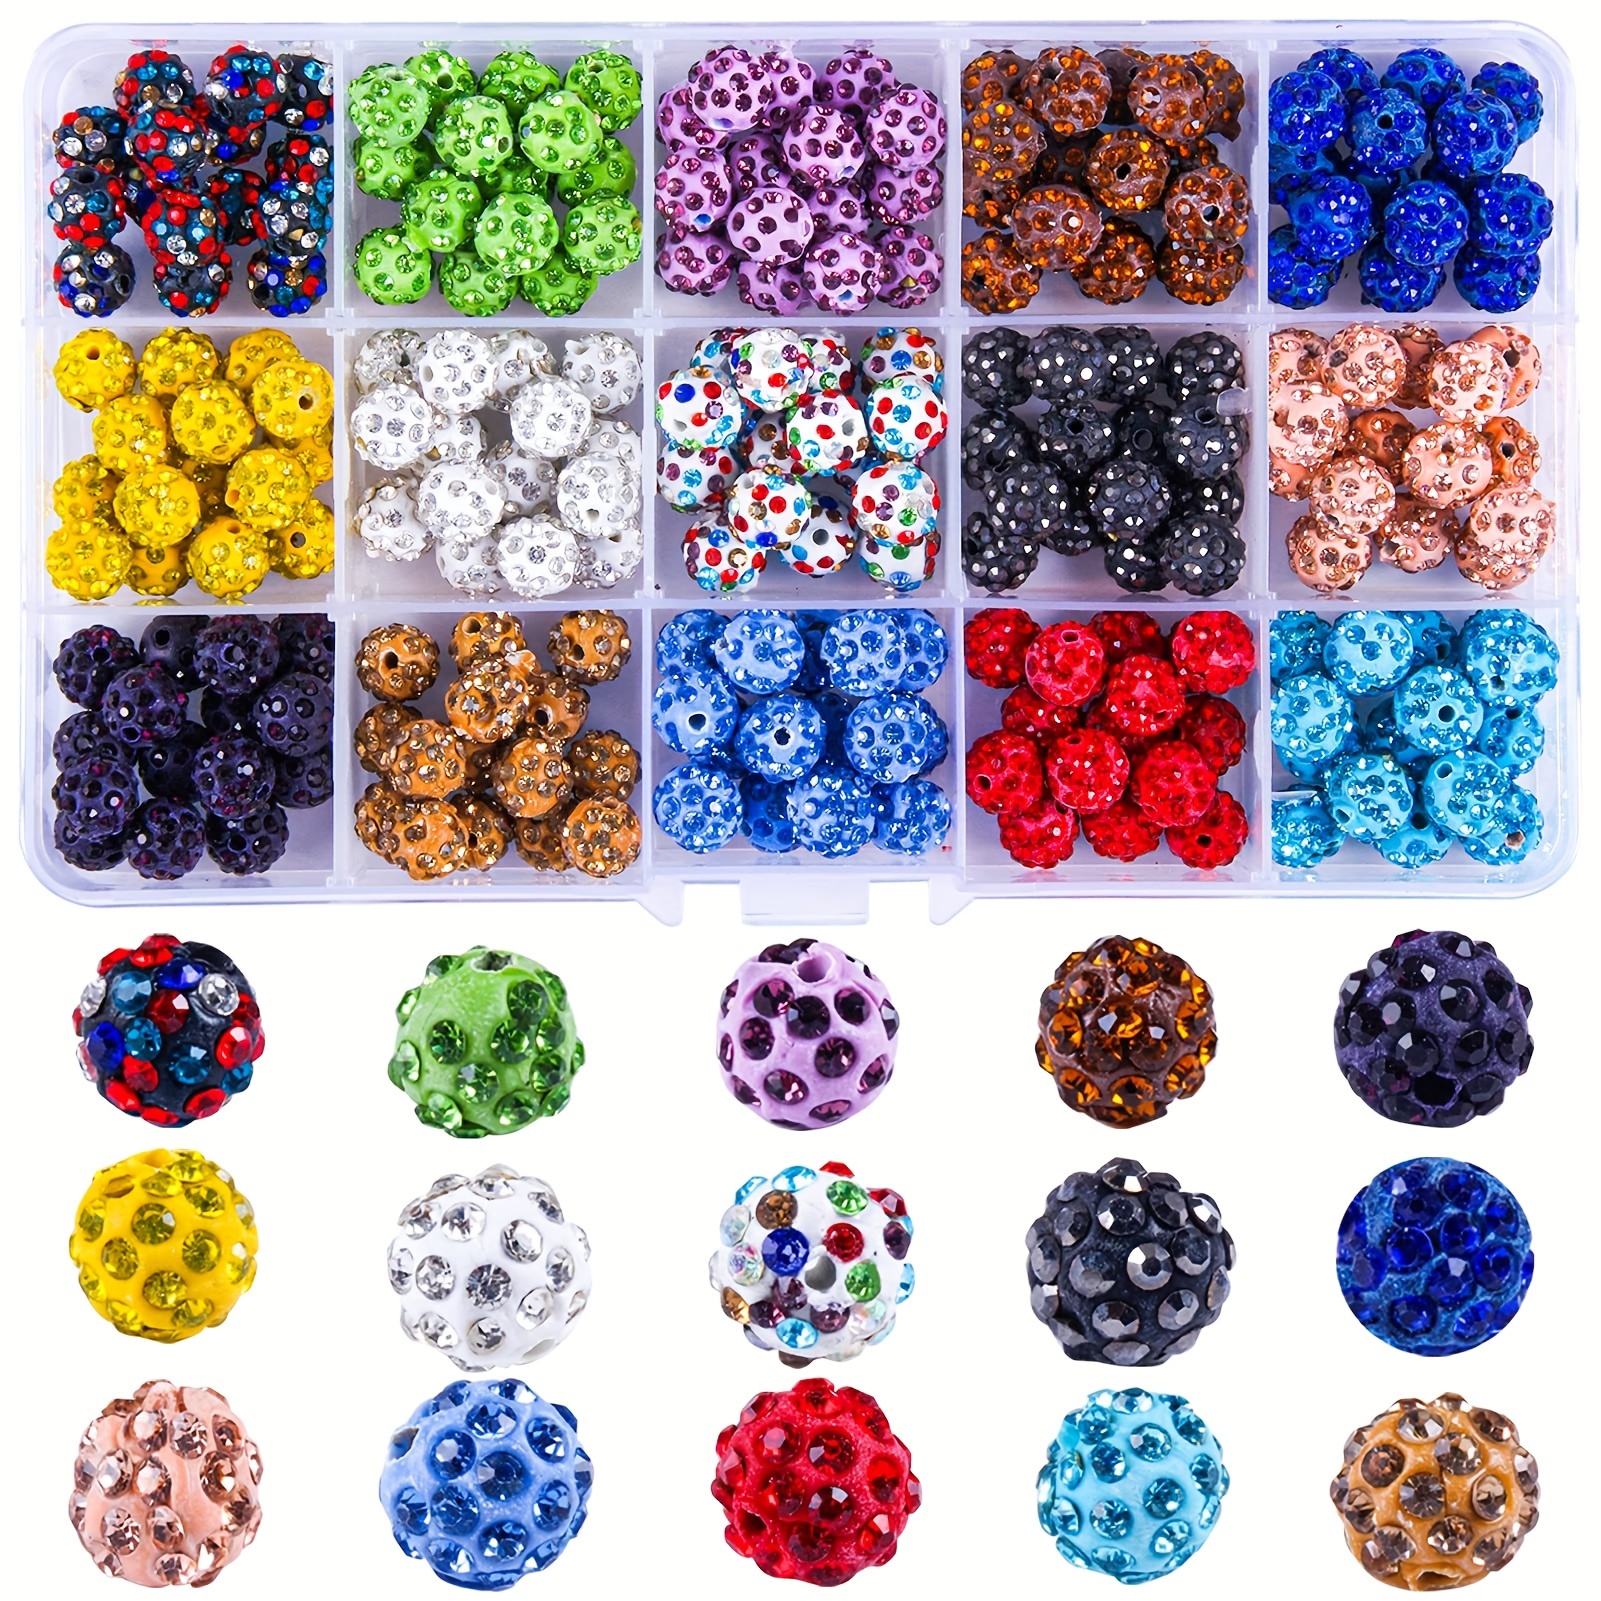 

225pcs 8mm Disco Ball Rhinestone Pave Crystal Polymer Clay Loose Beads For Jewelry Making Diy Special Bracelet Necklace Earrings Handmade Craft Supplies